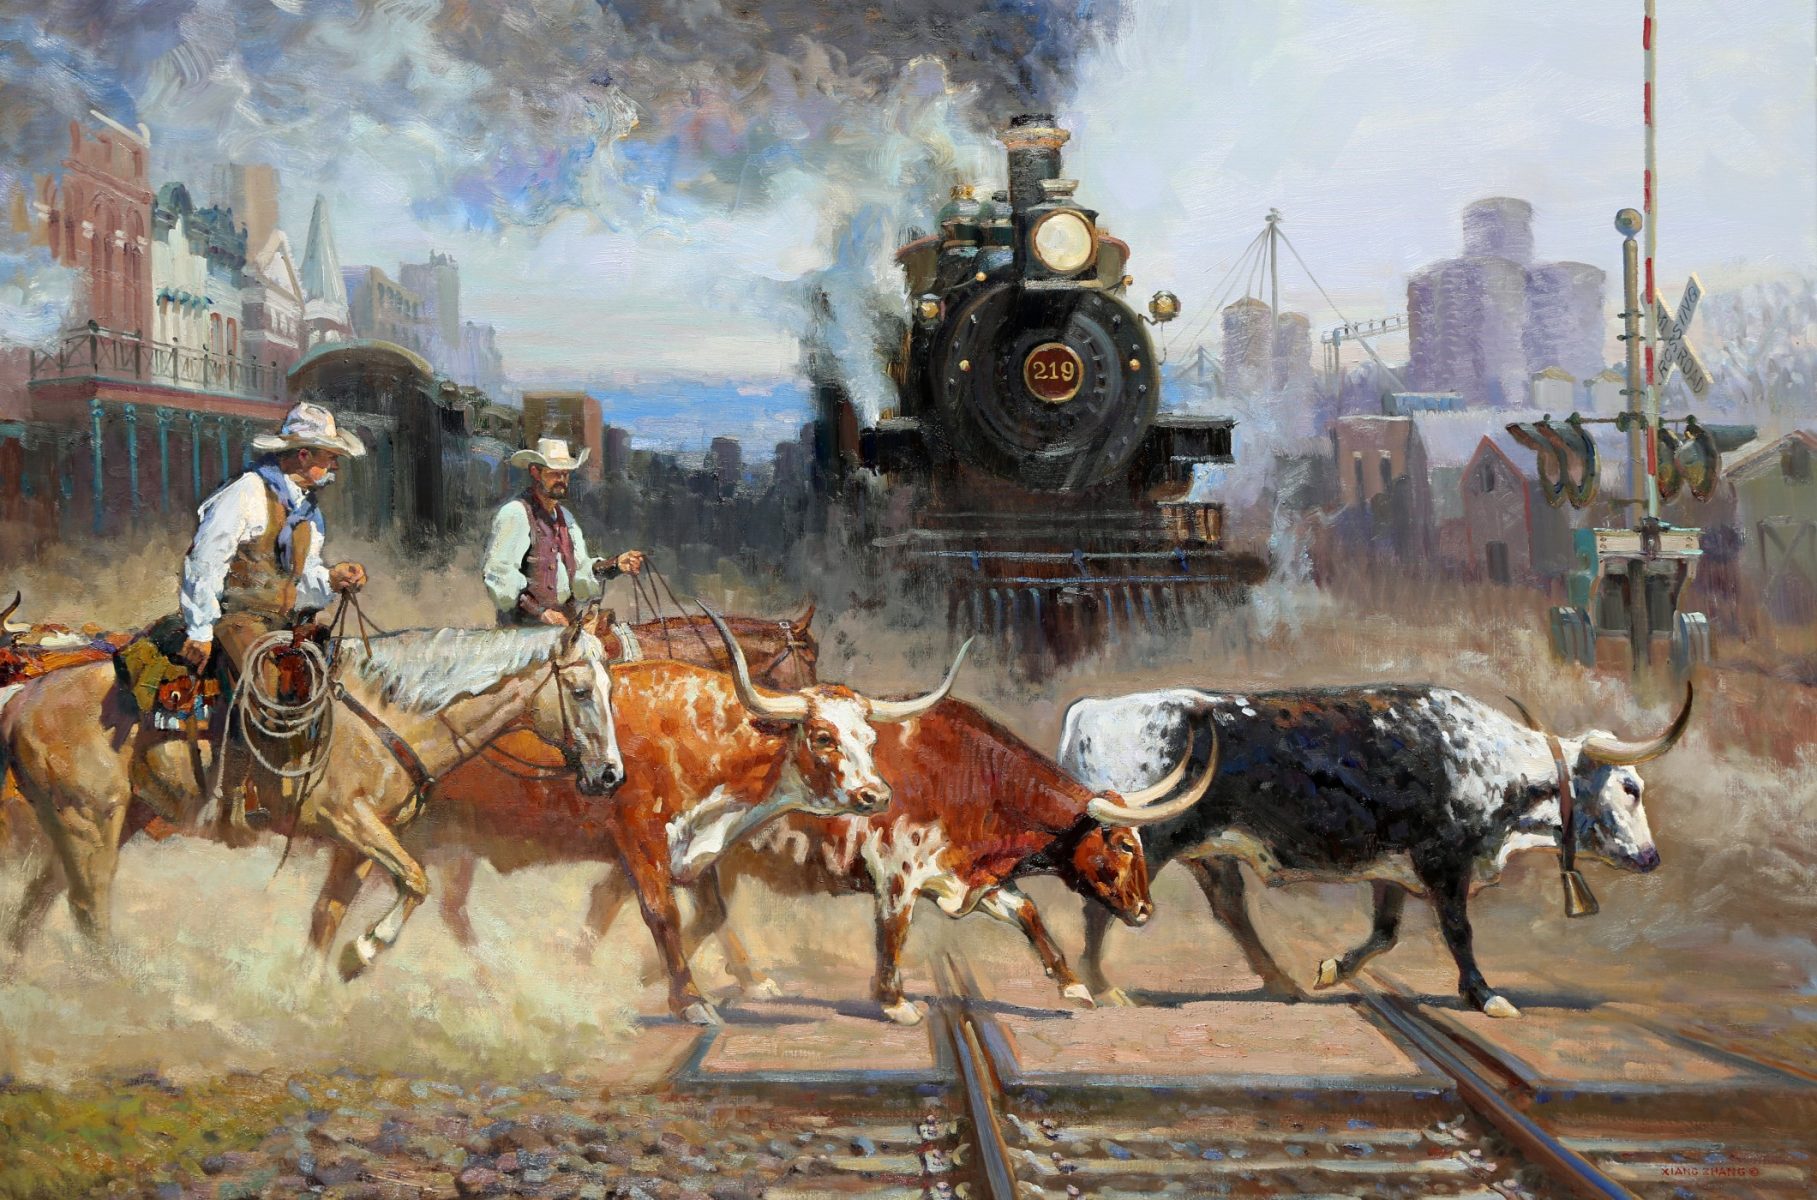 Western impressionist painting of cattle drive crossing in front of large train by Xiang Zhang